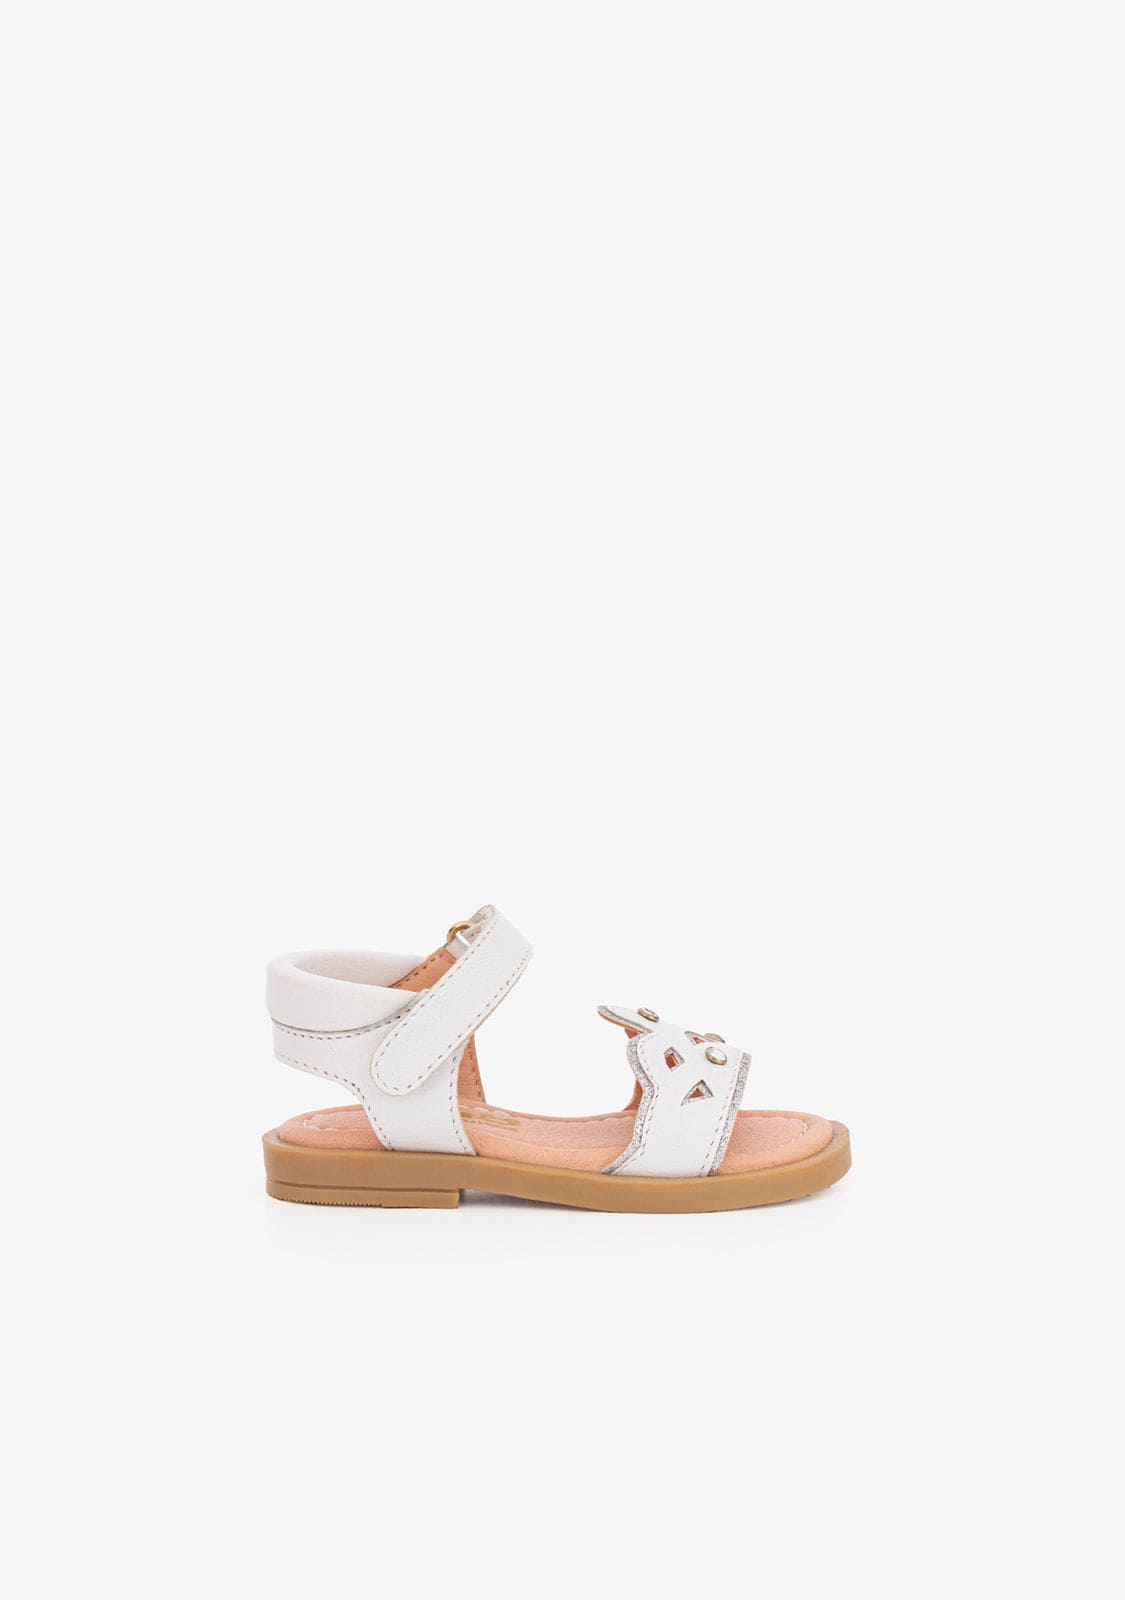 OSITO Shoes Baby's Crown White Leather Sandals